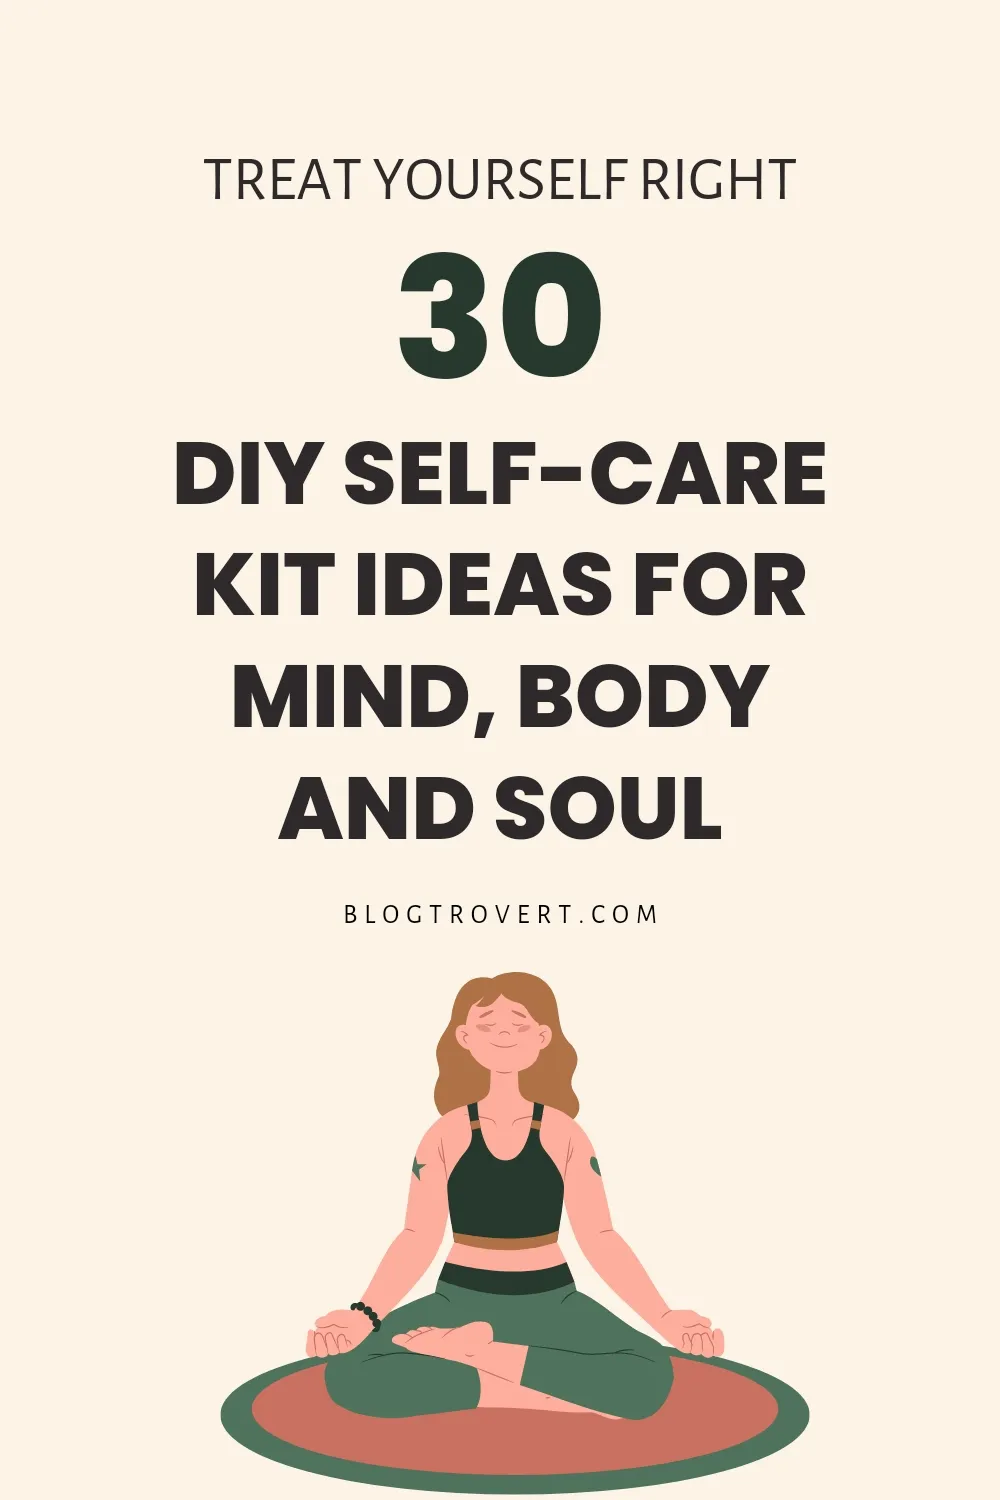 30 DIY self-care kit ideas to create your "me time" package 2